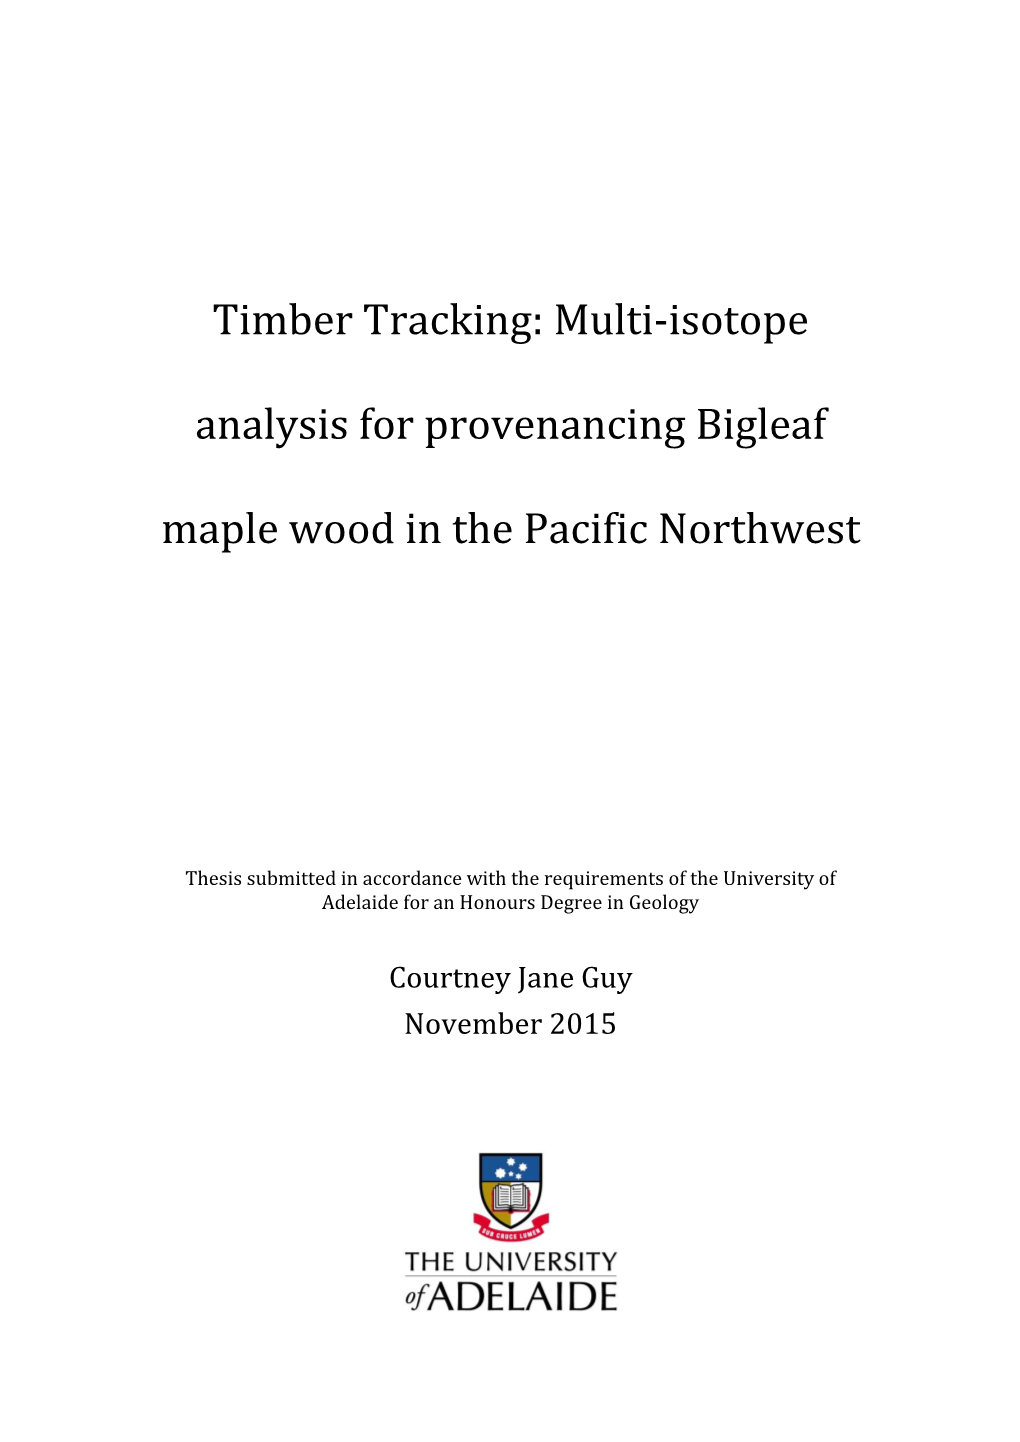 Timber Tracking: Multi-Isotope Analysis for Provenancing Bigleaf Maple